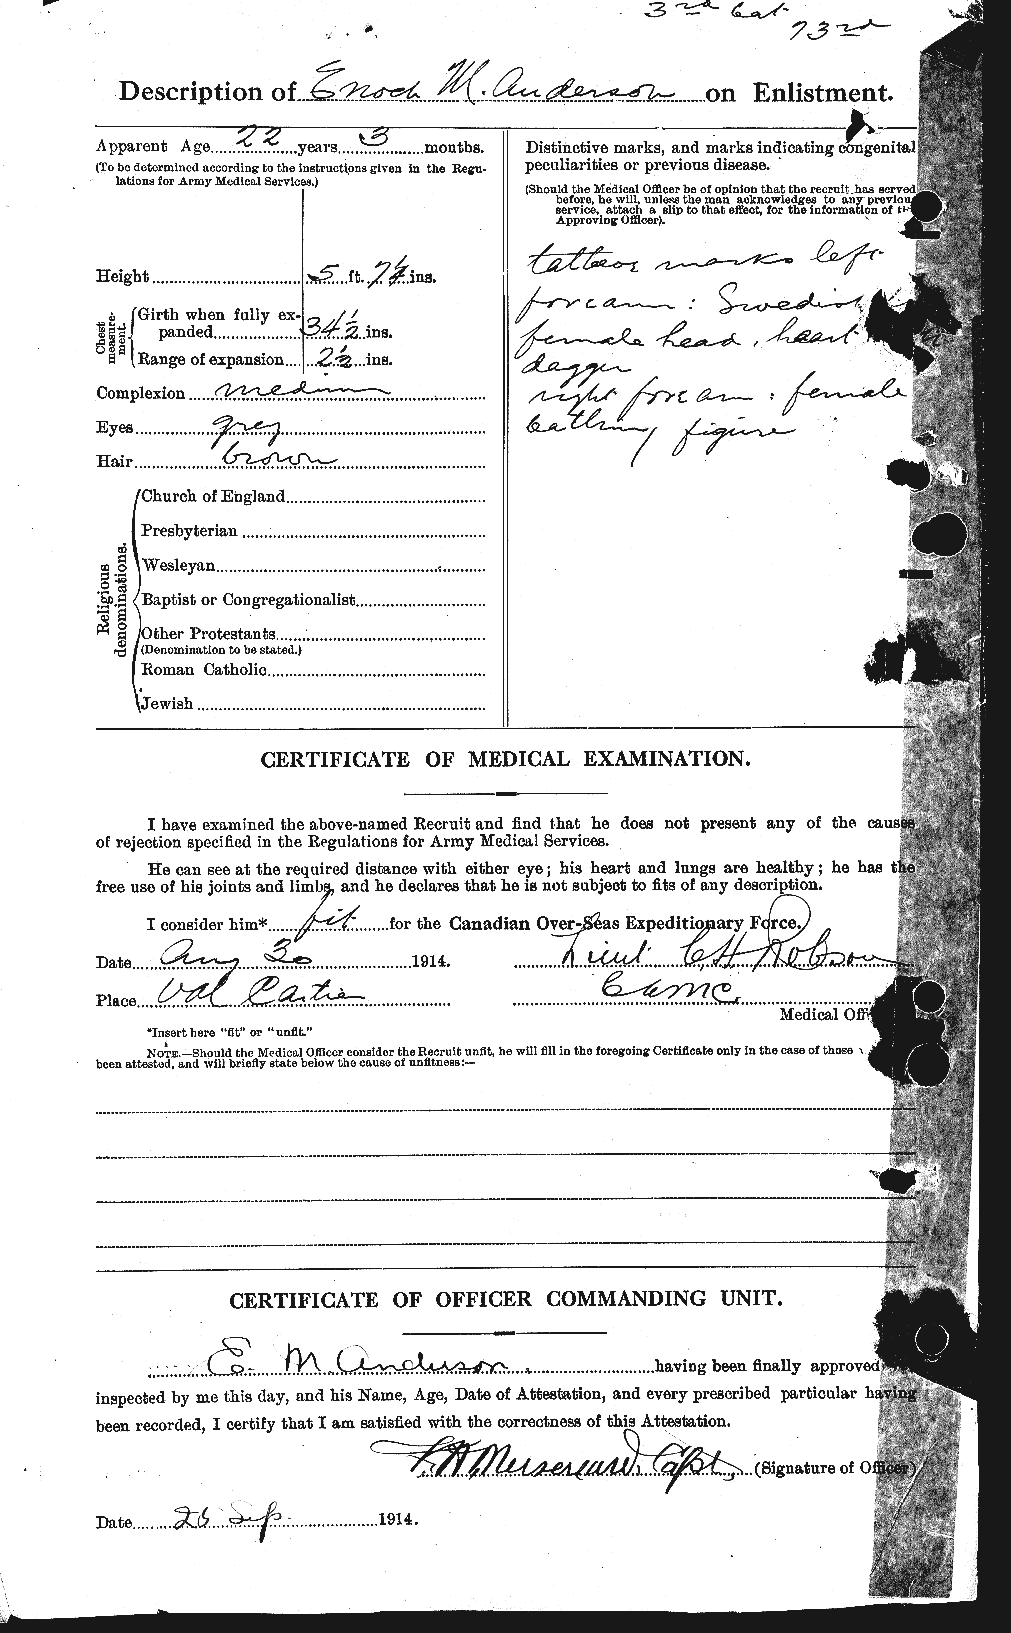 Personnel Records of the First World War - CEF 209900b